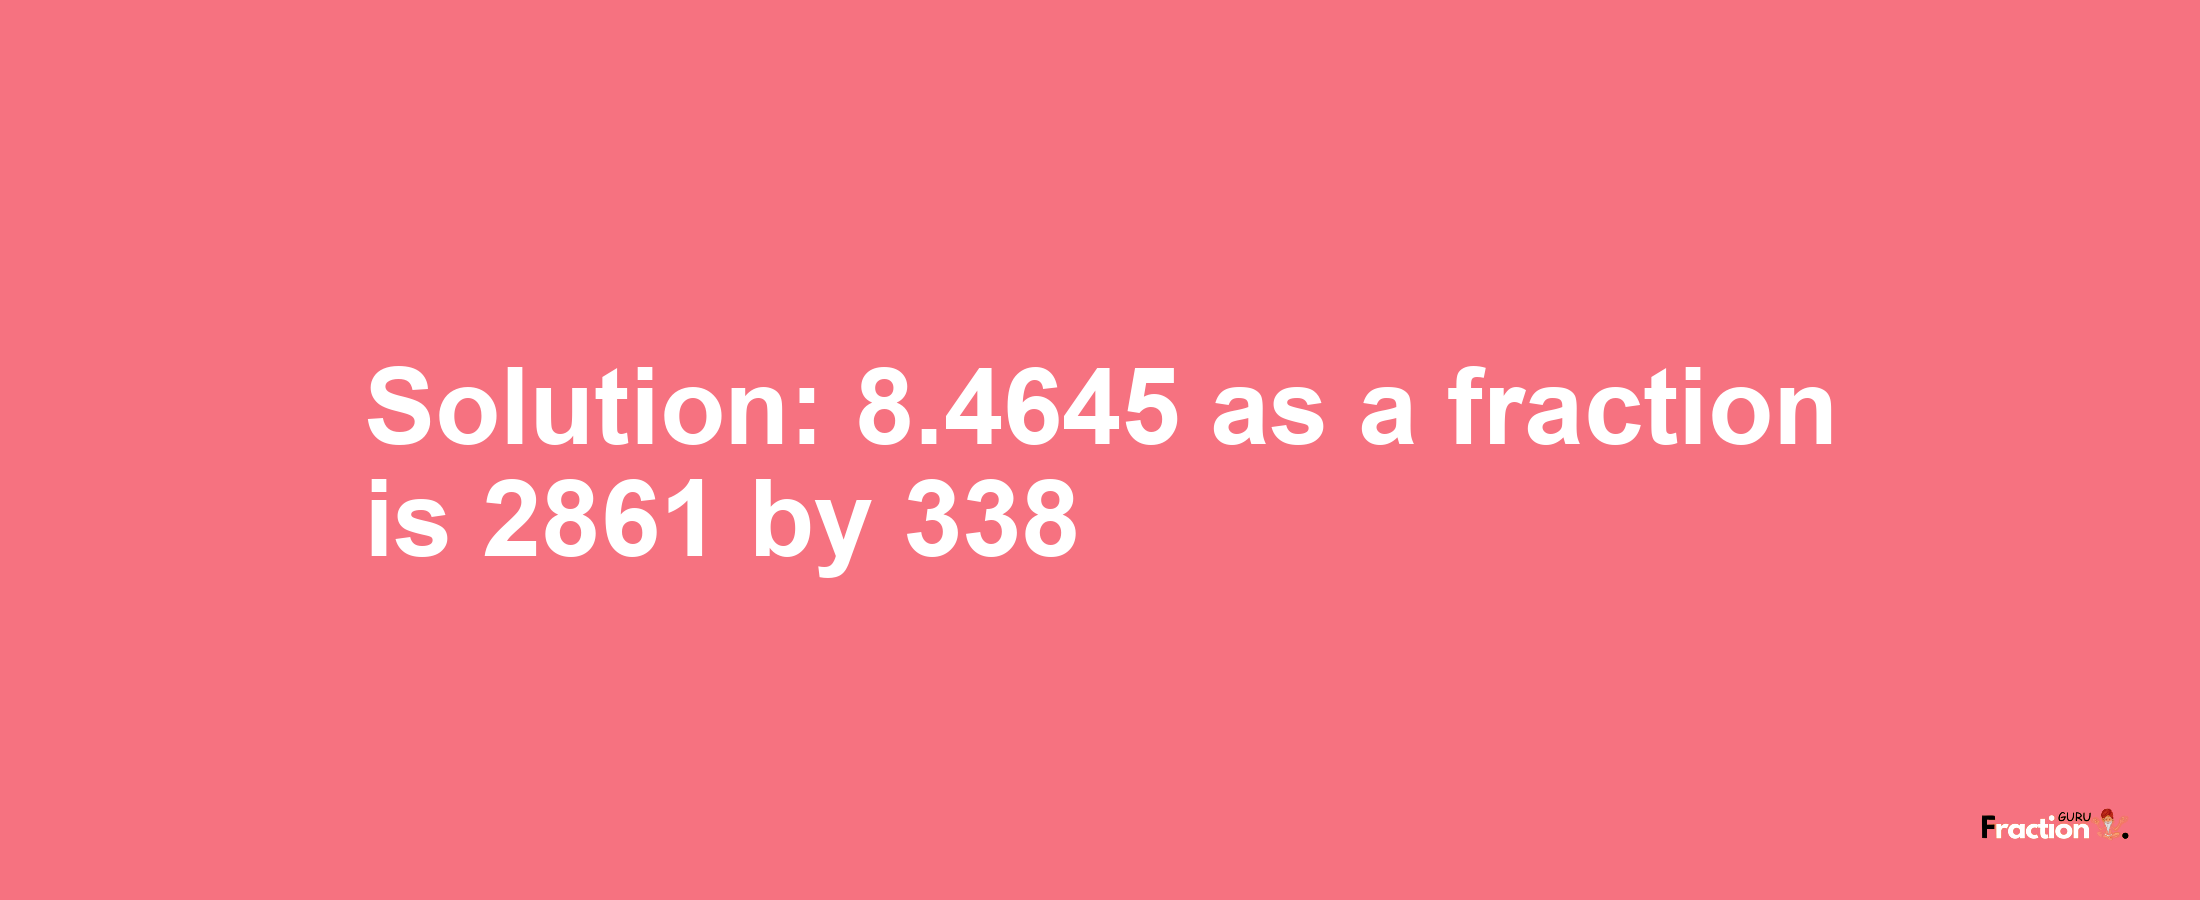 Solution:8.4645 as a fraction is 2861/338